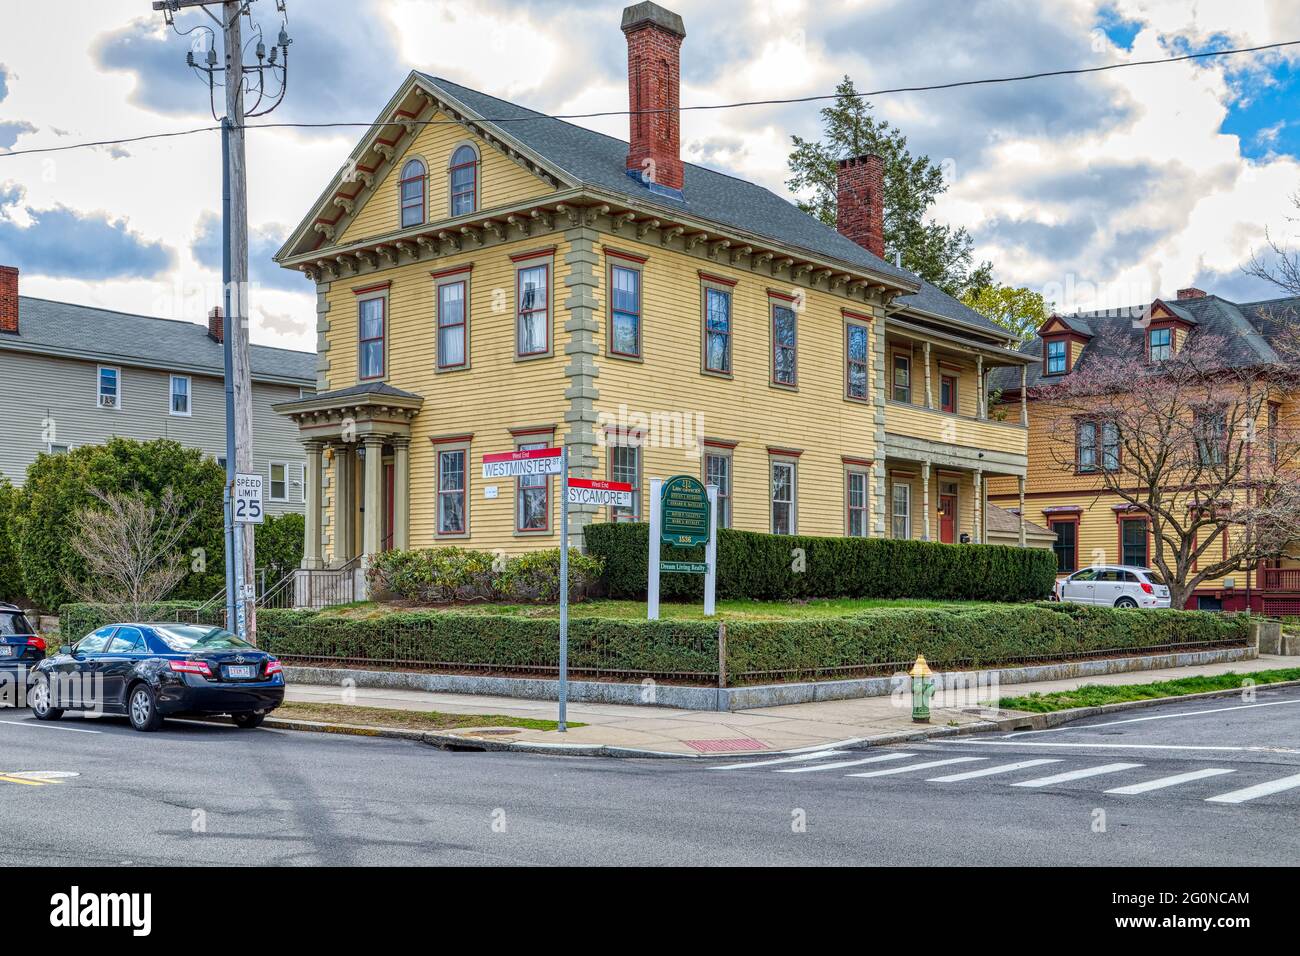 Samuel Irons House, 1536 Westminster Street, Federal Hill. Teil des Broadway-Armory Historic District, National Register of Historic Places. Stockfoto